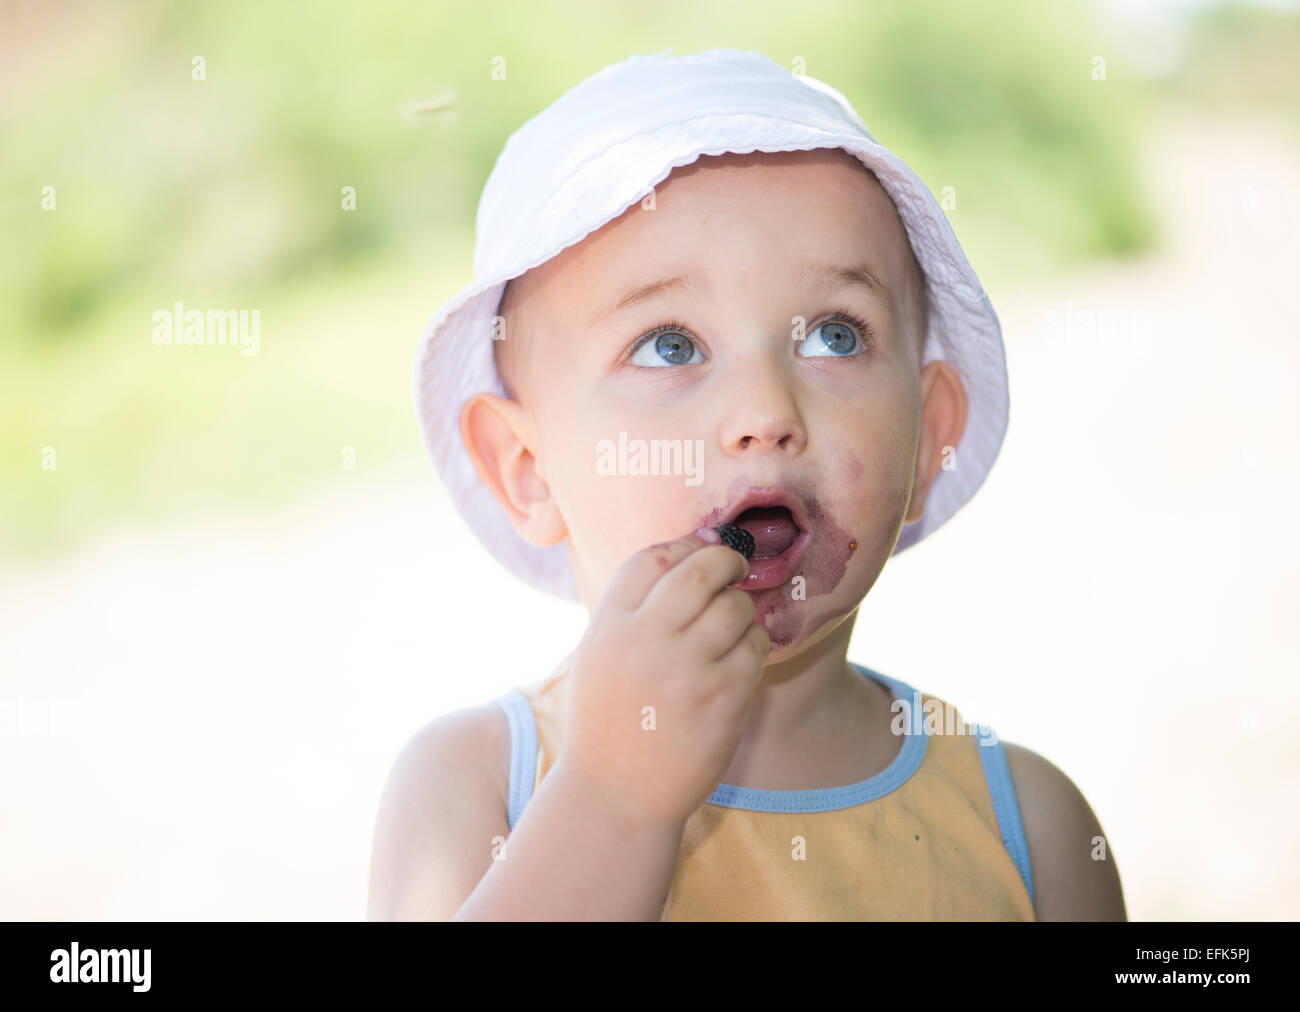 Child eating mulberries Stock Photo